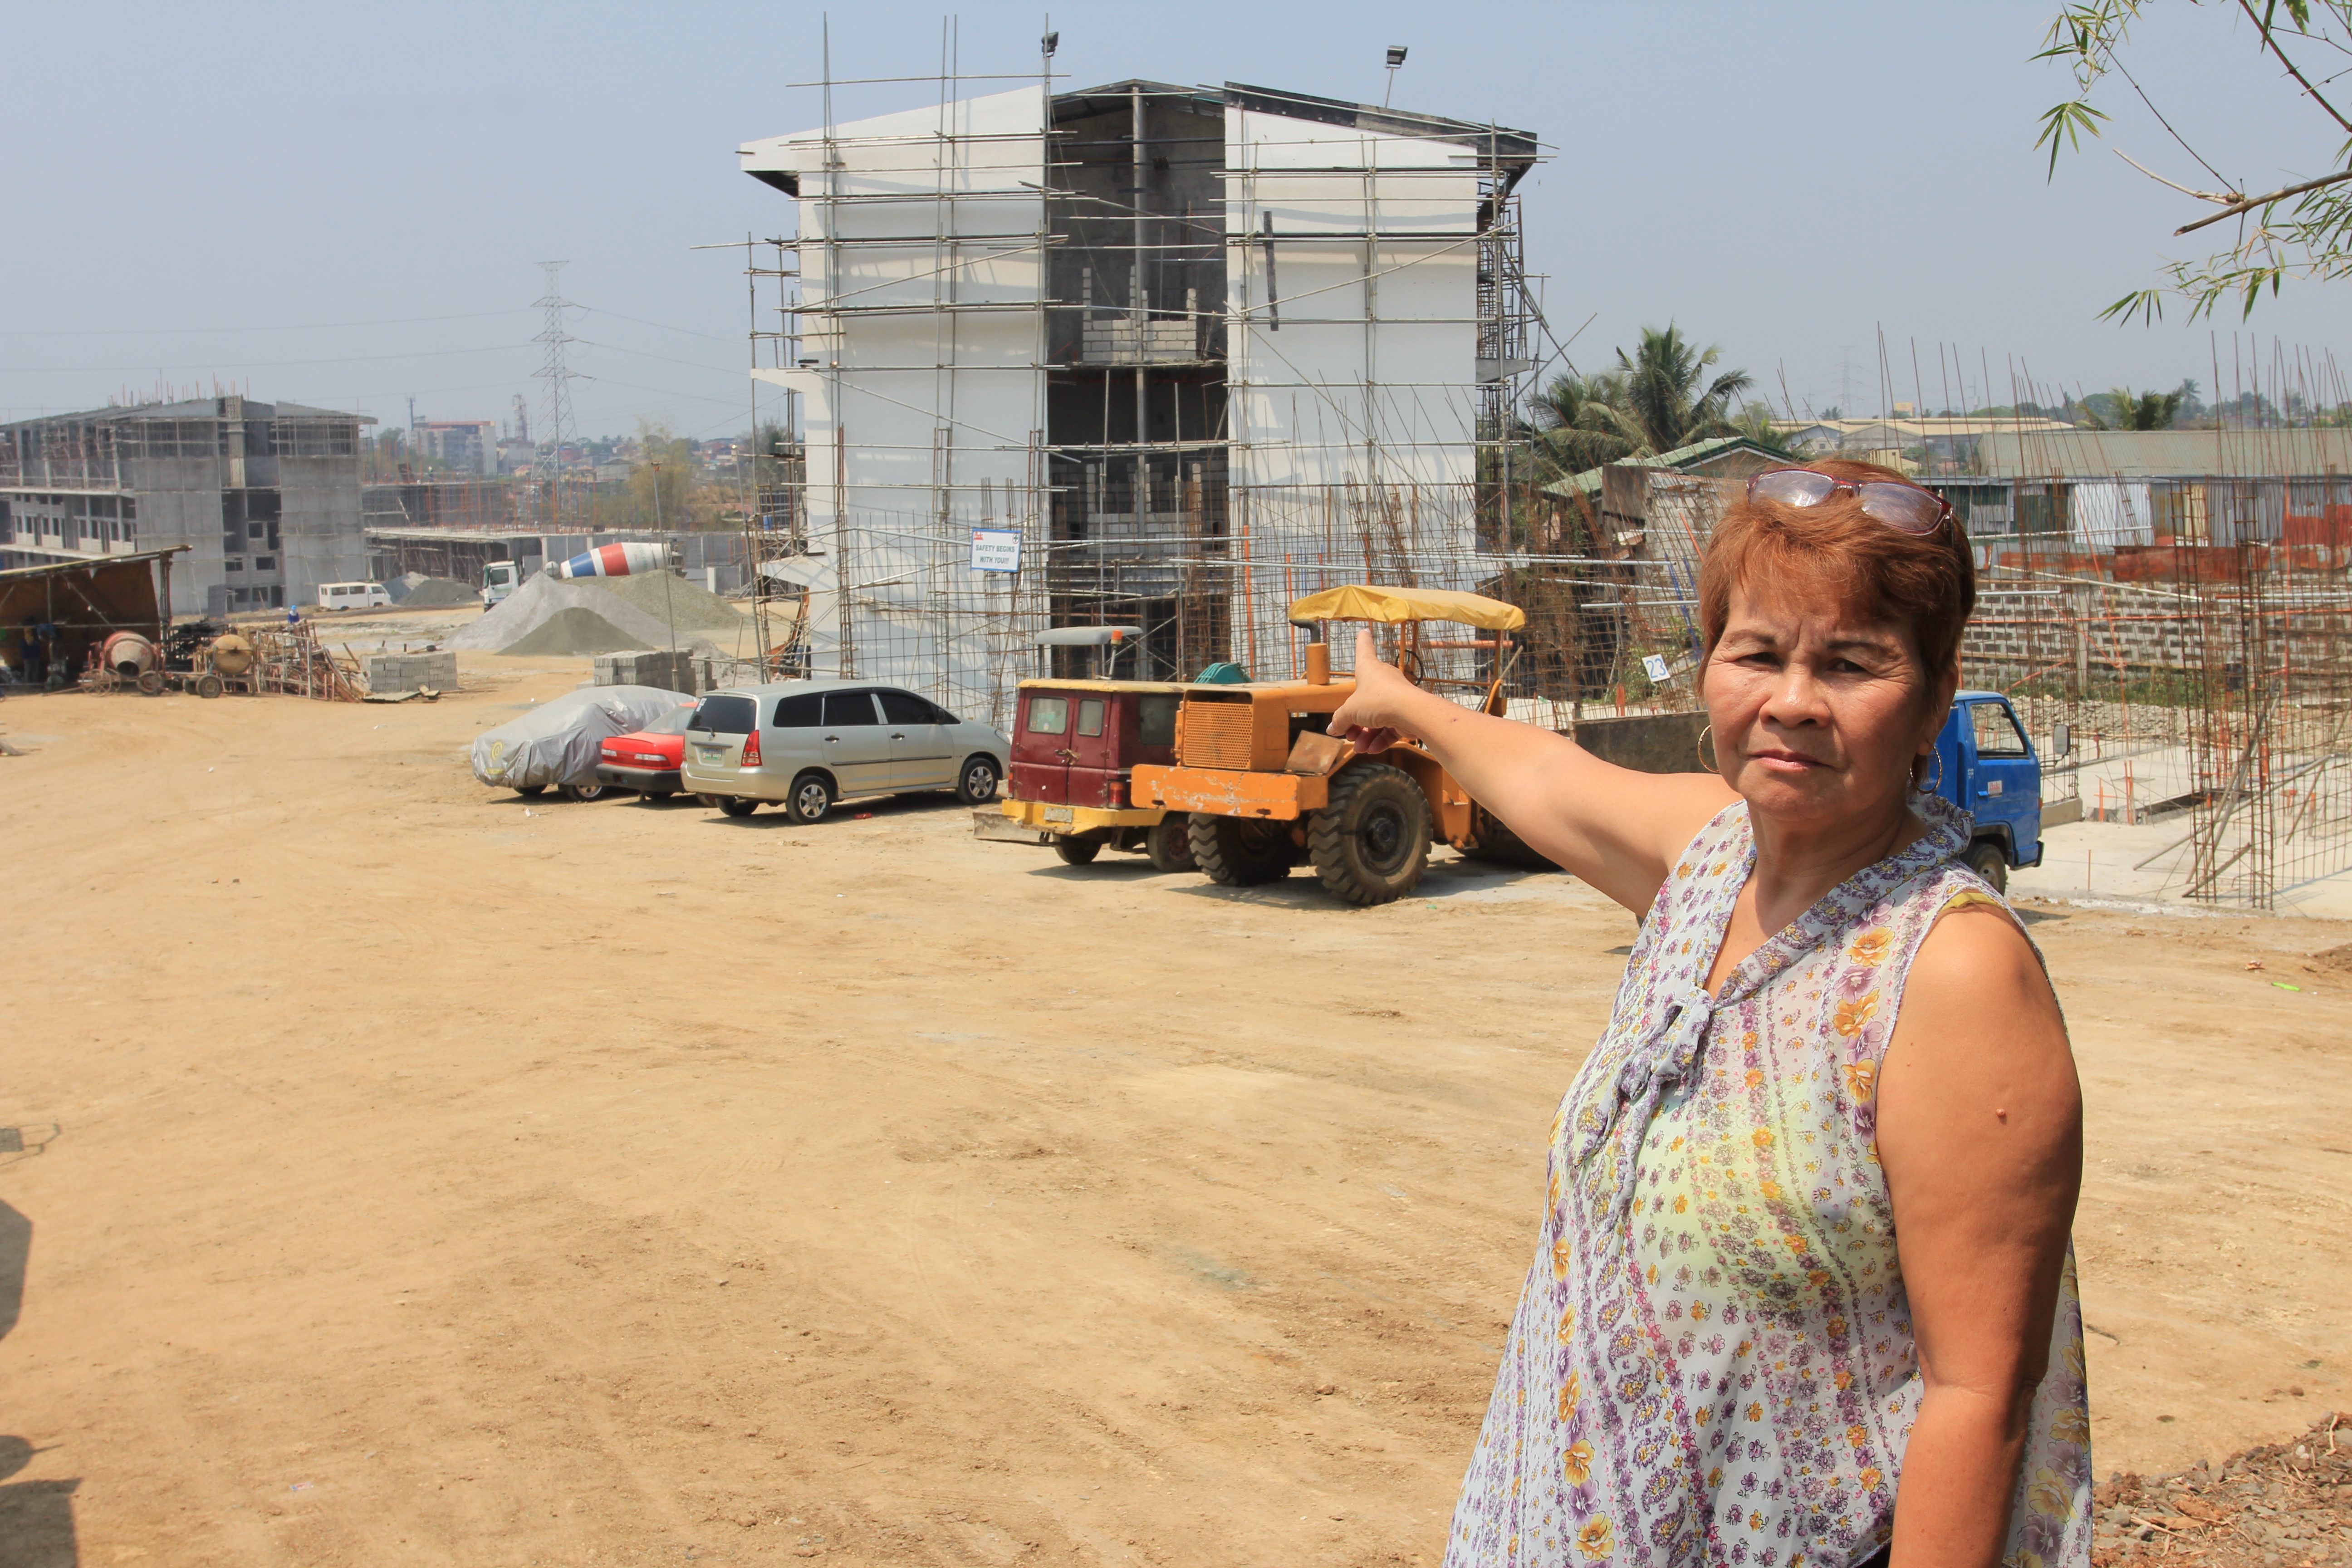 DECENT HOUSING. Former OFW Enriqueta Catayong points to the housing project that will provide decent, secure homes for thousands of relocated informal settlers. All photos by Gerard P. Garcia 